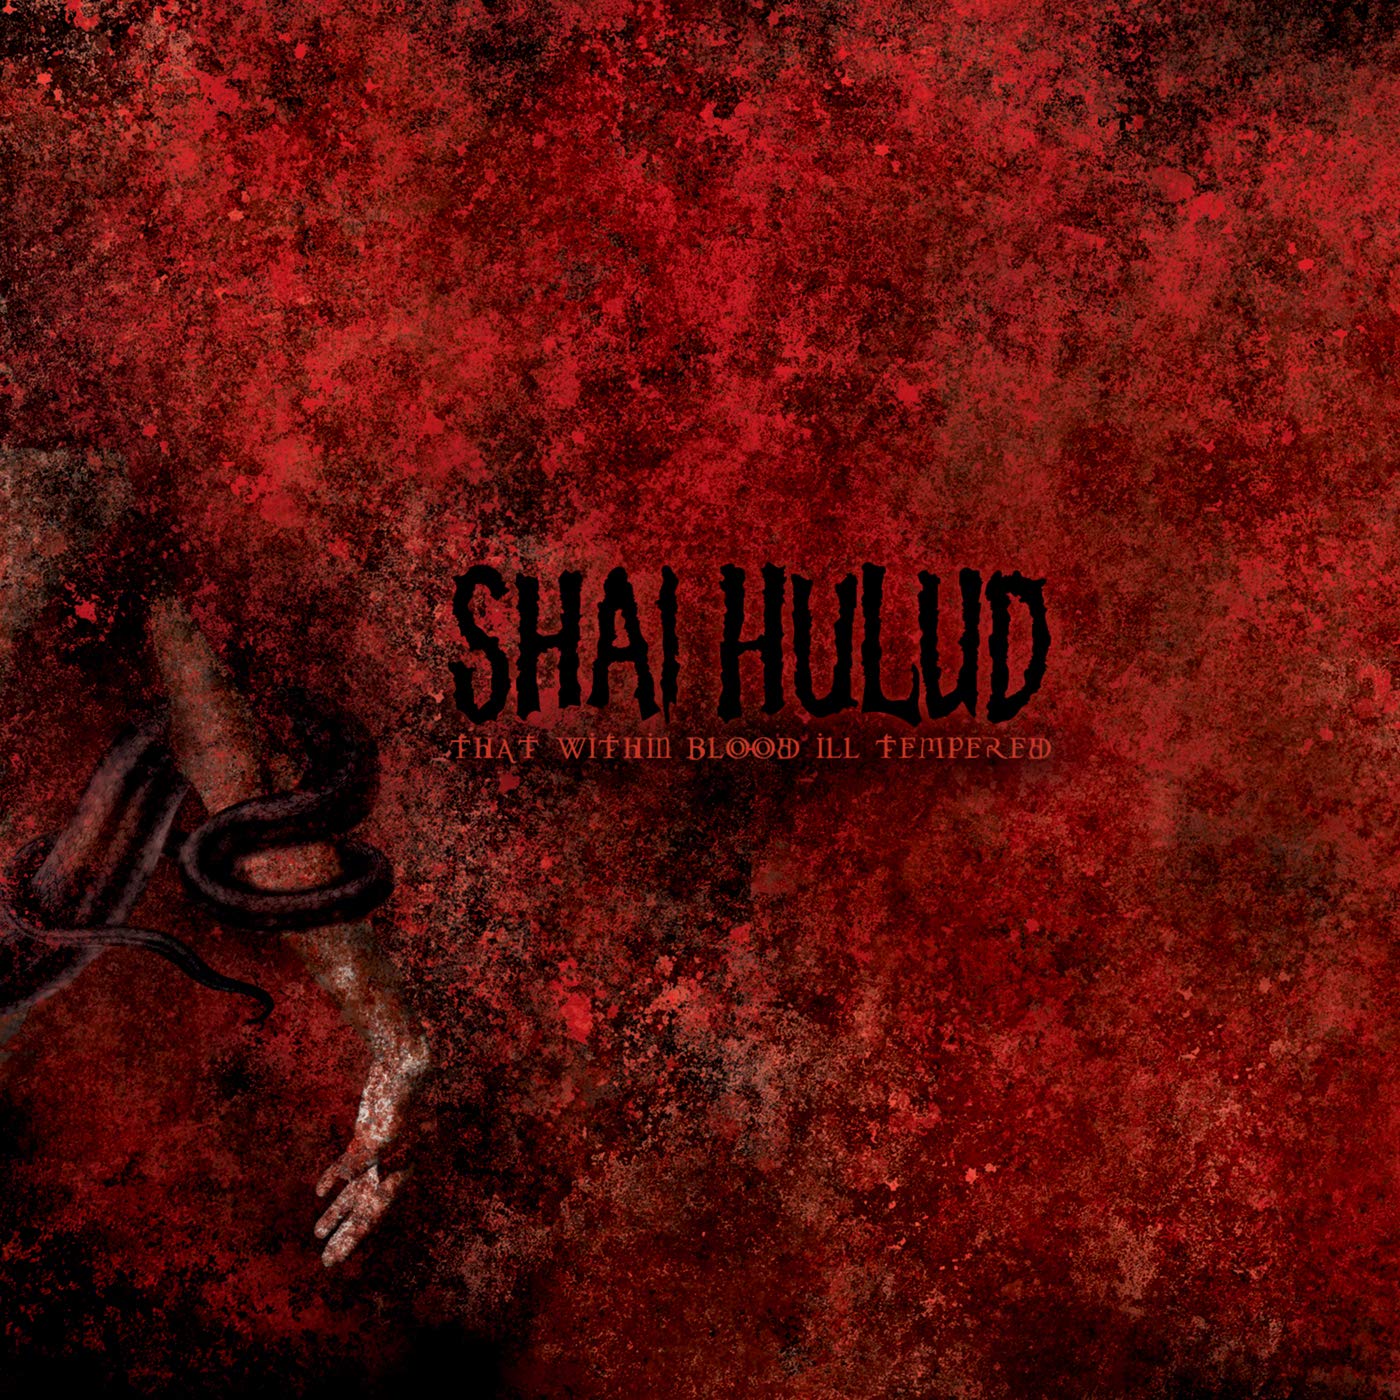 SHAI HULUD - THAT WITHIN BLOOD ILL-TEMPERED Vinyl LP